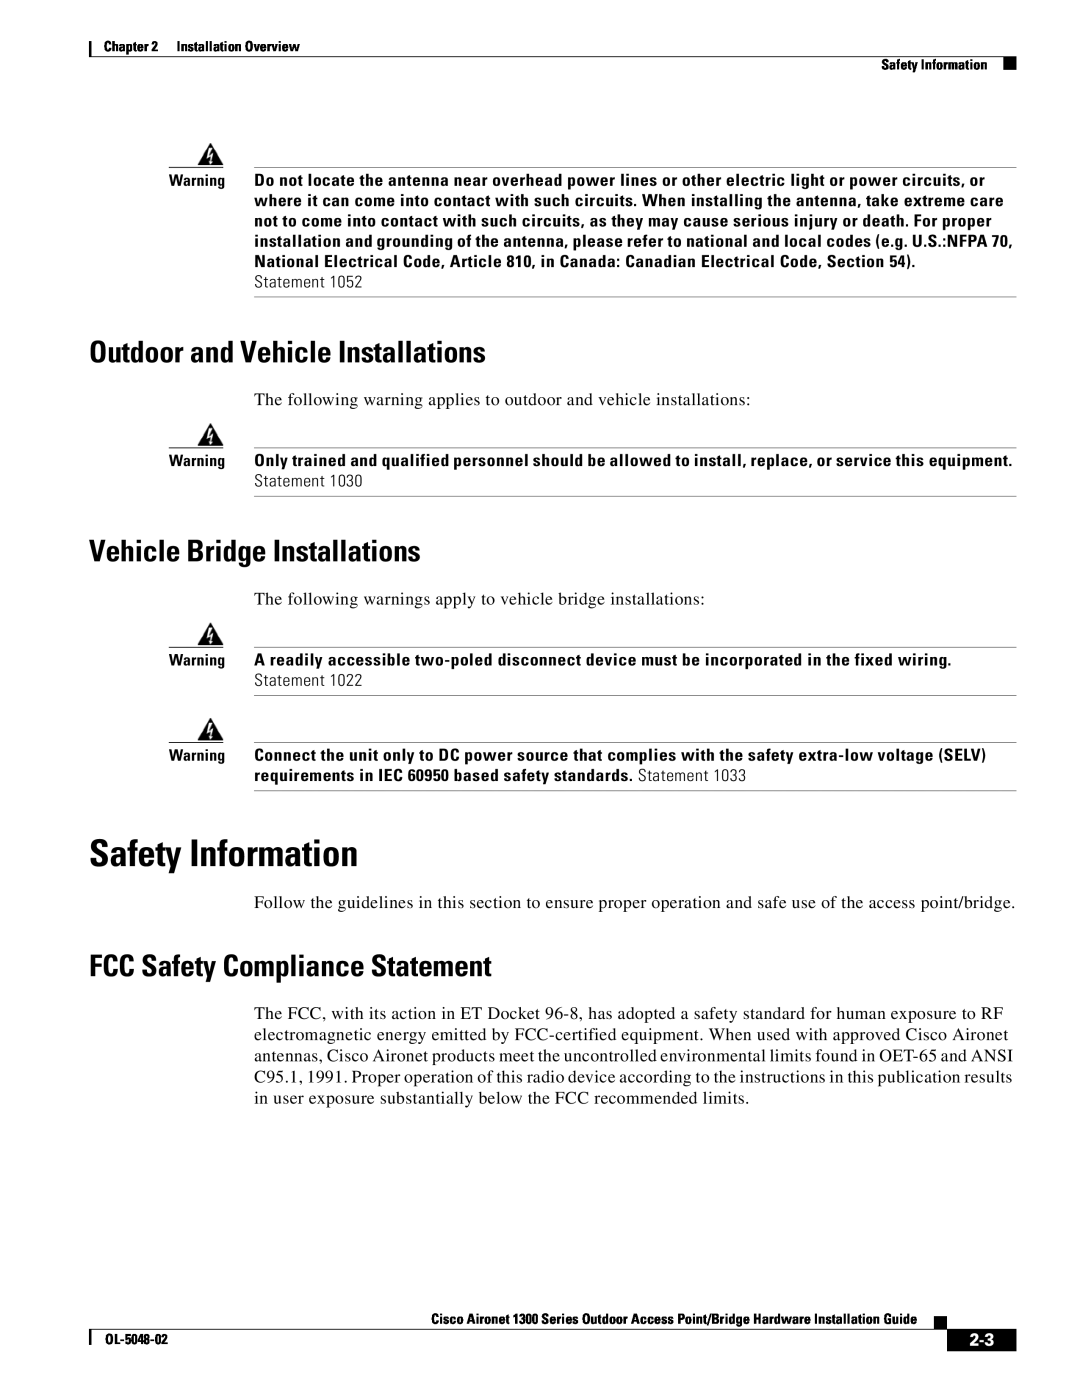 Cisco Systems 1300 Series manual Safety Information, Outdoor and Vehicle Installations, Vehicle Bridge Installations 